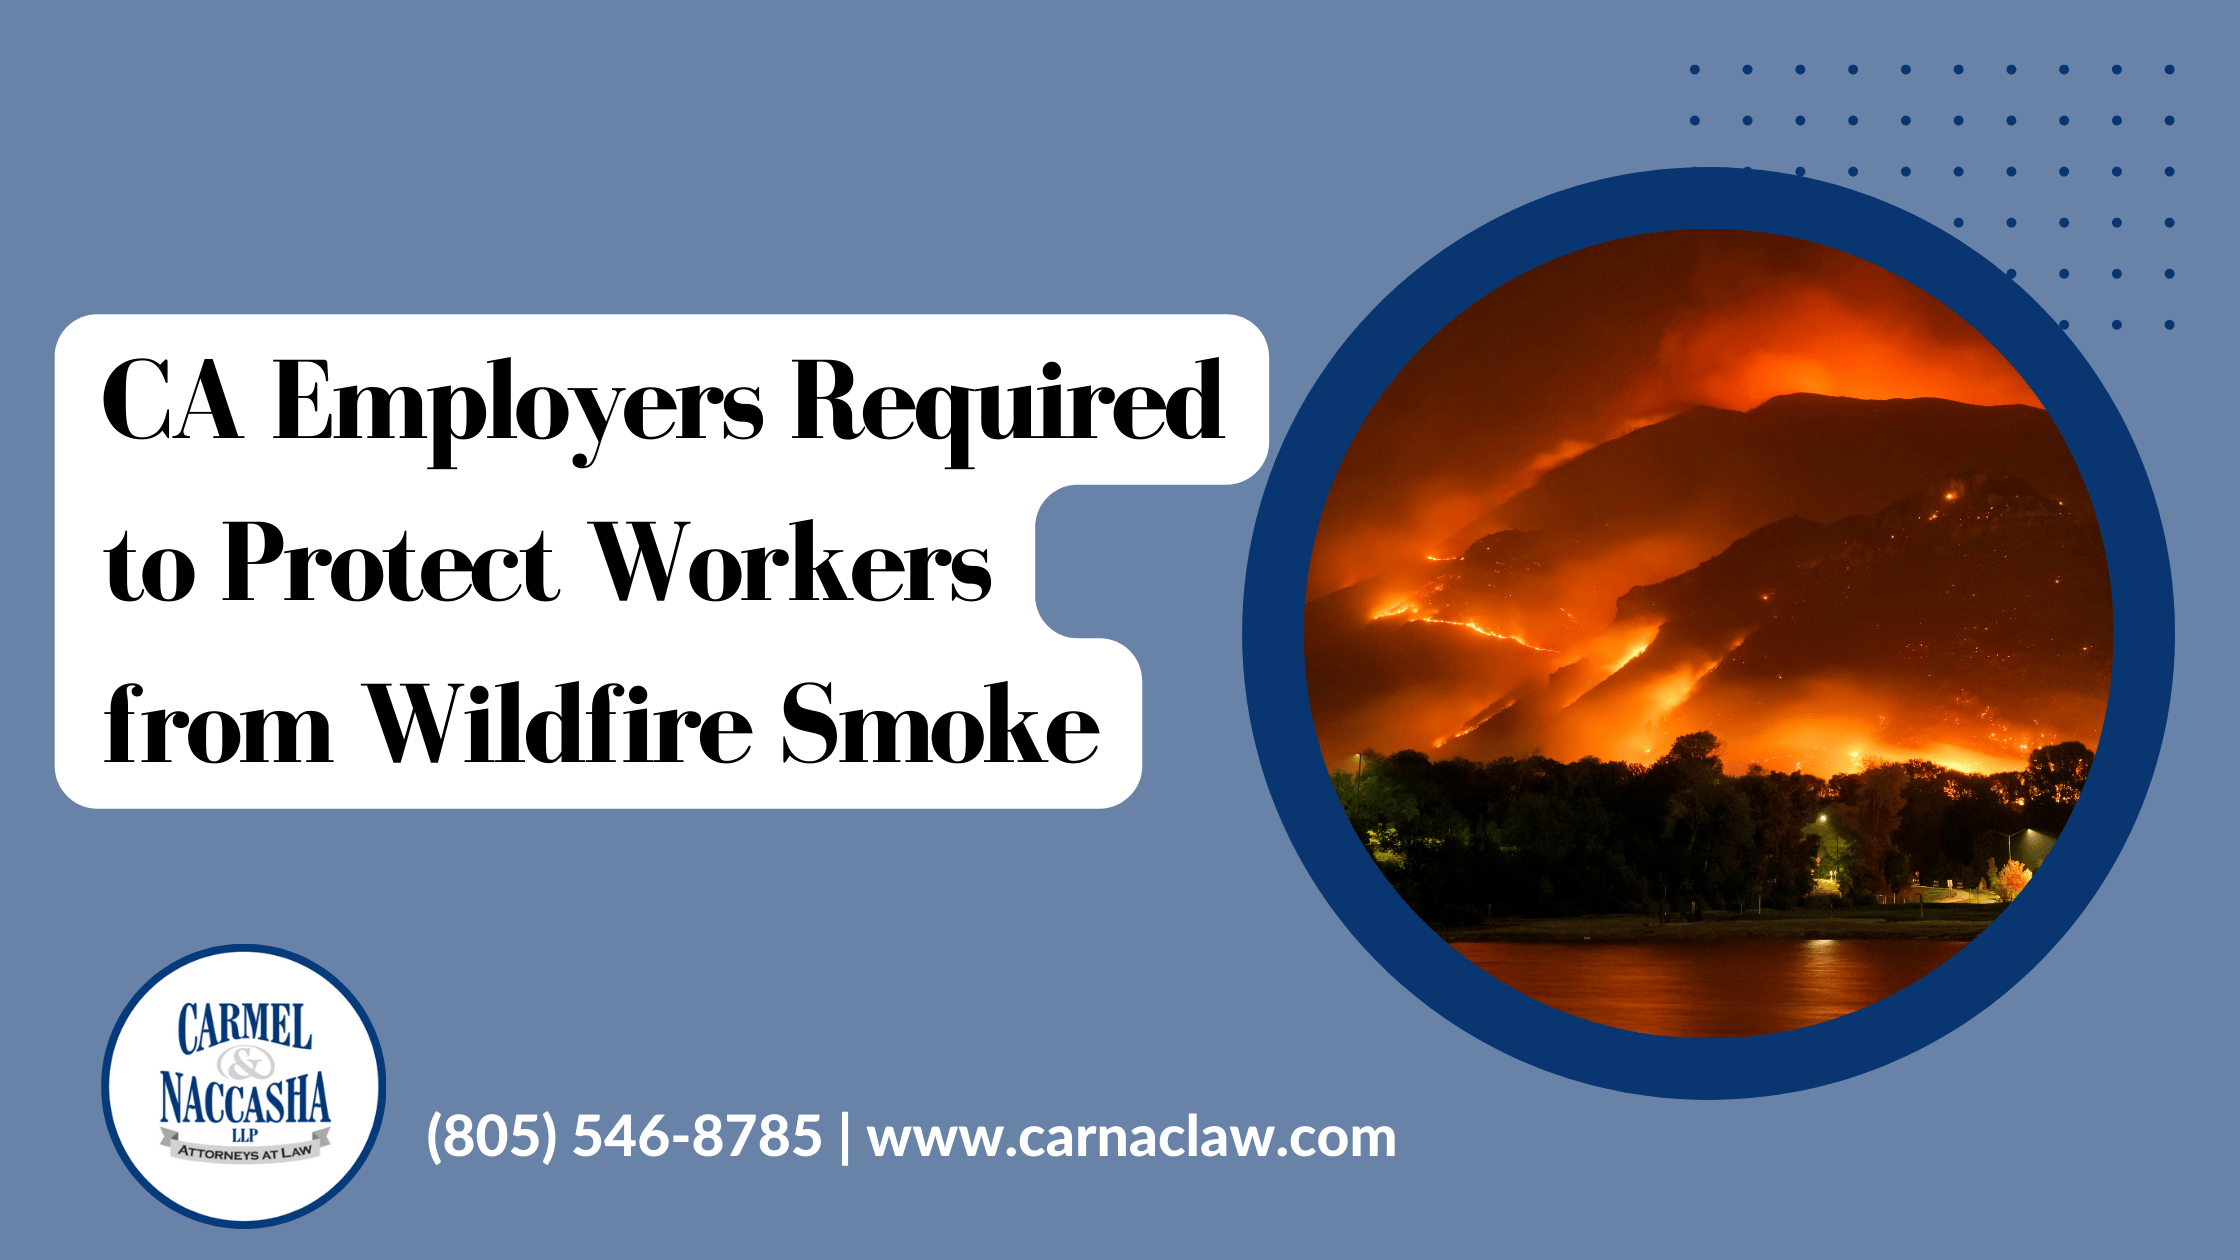 California Employers Required to Protect Workers from Wildfire Smoke